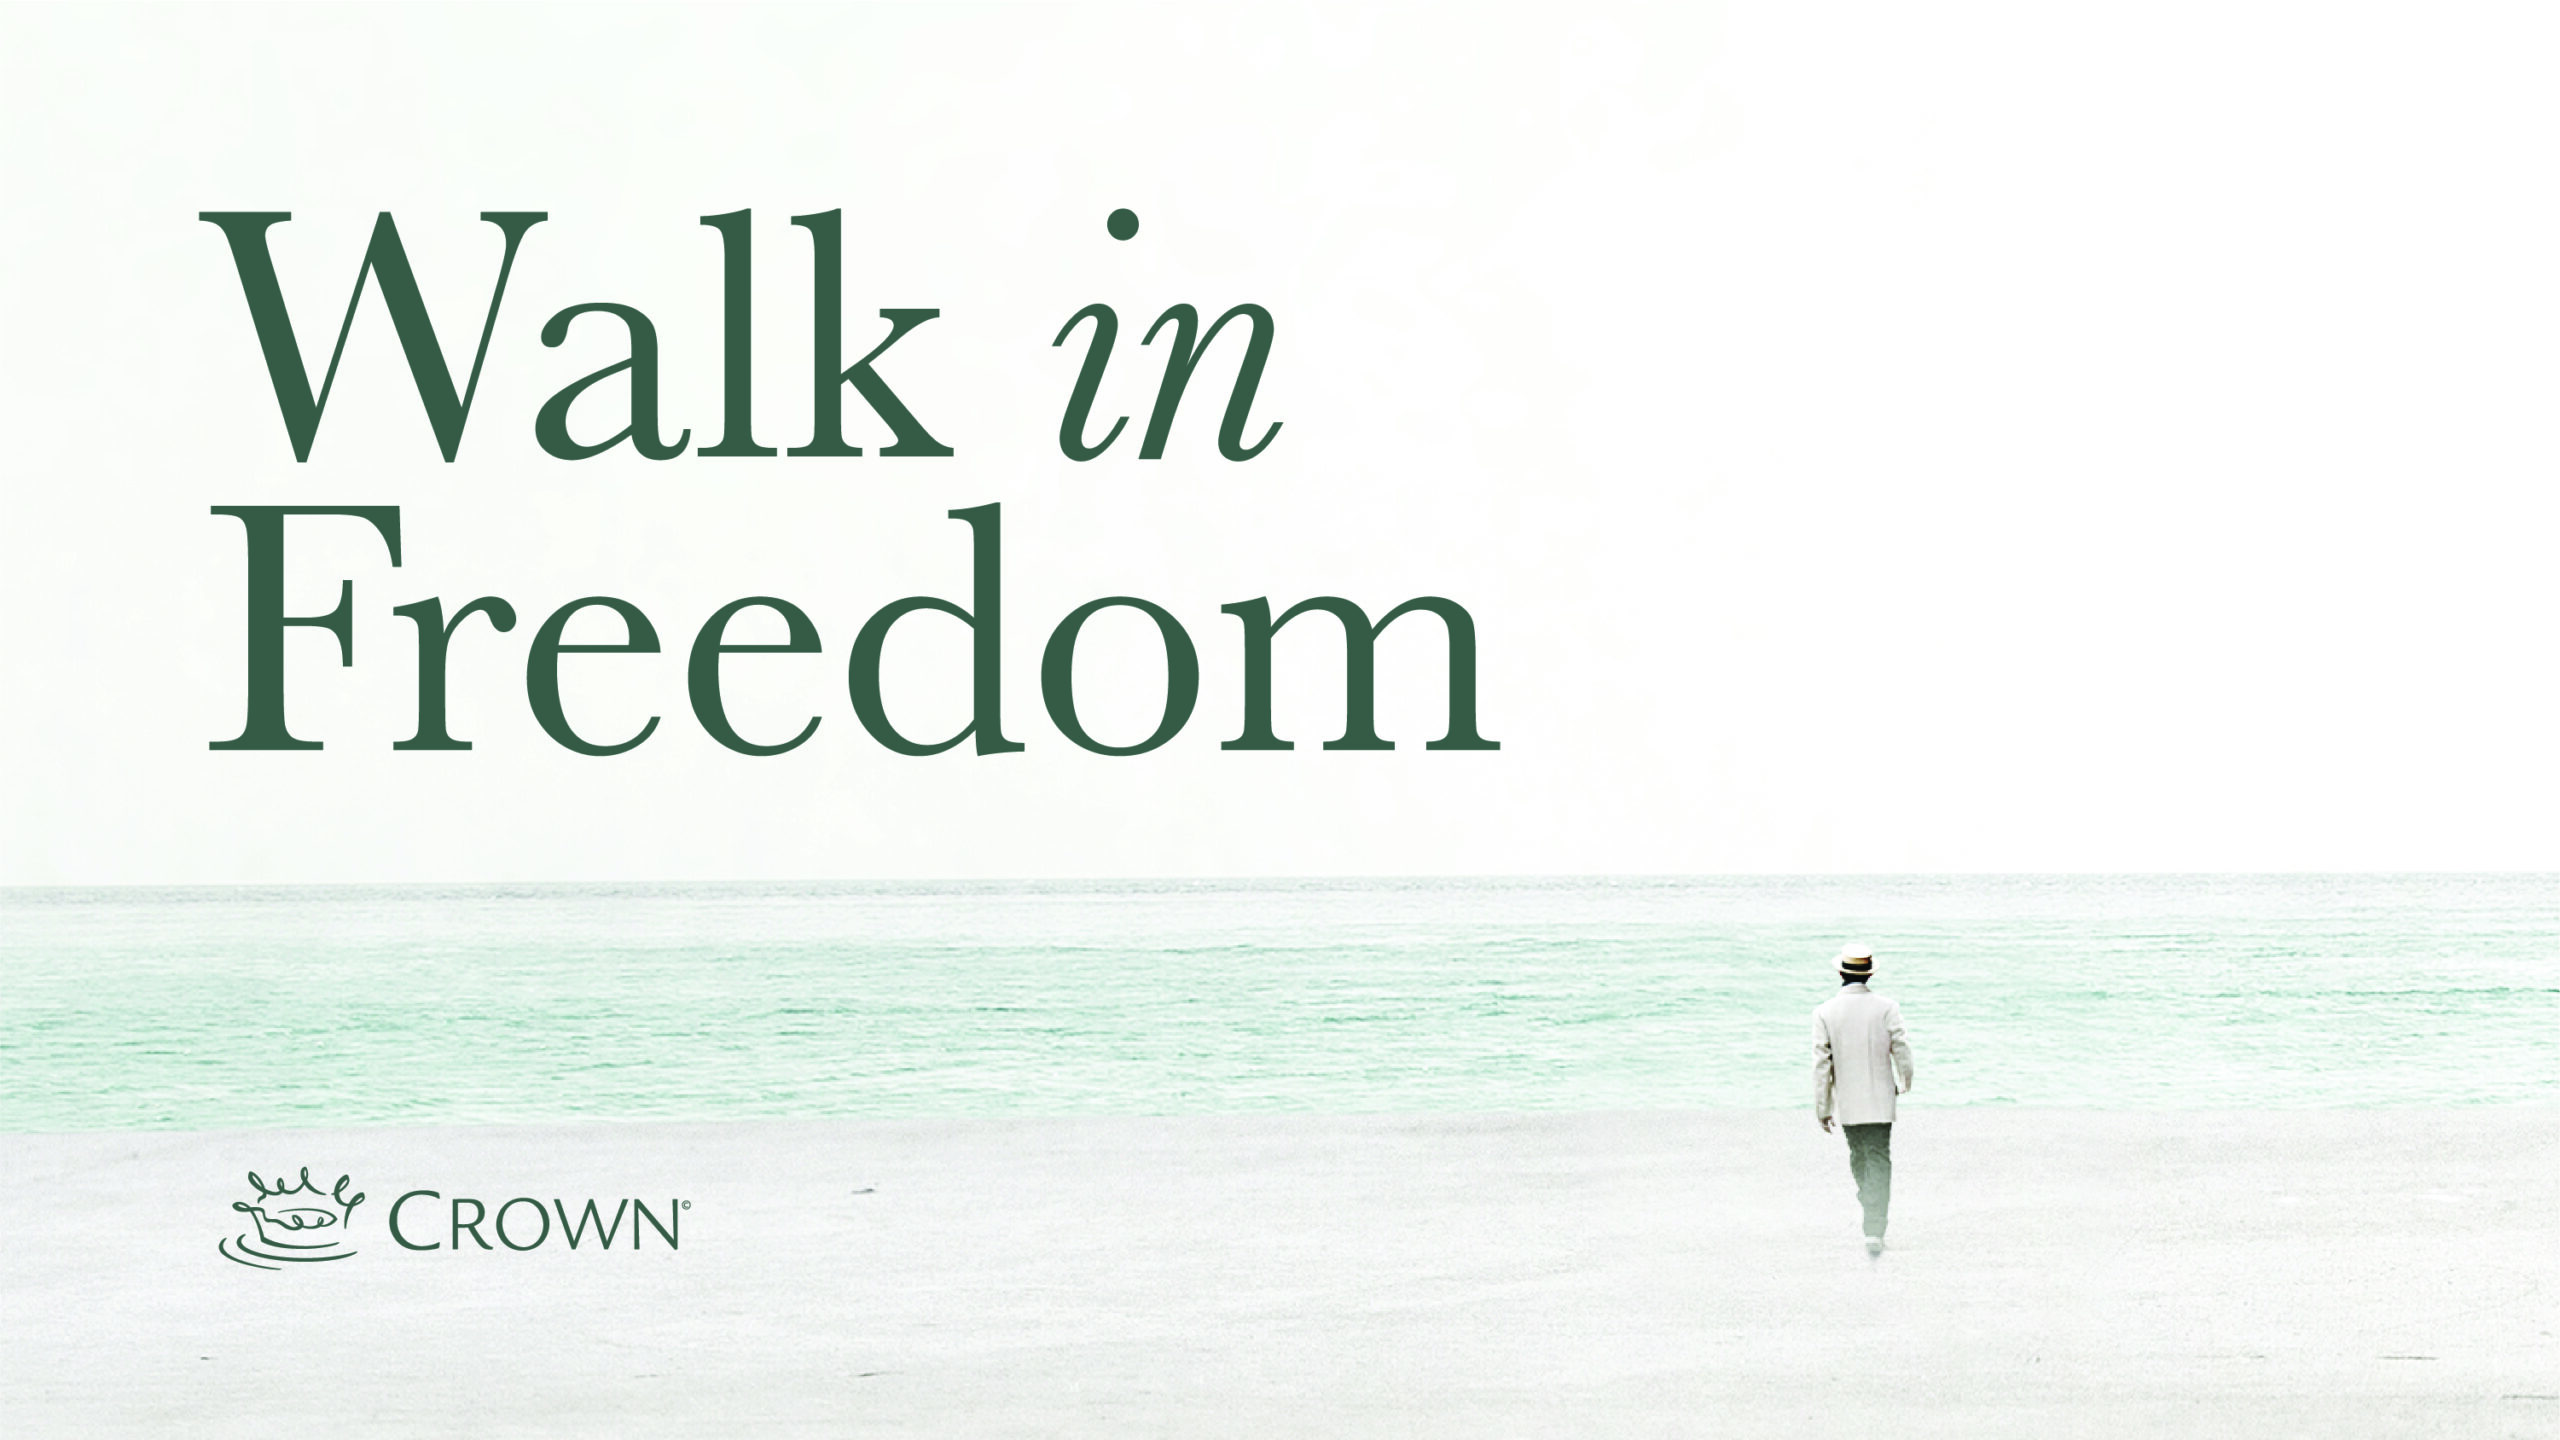 Youversion Walkinfreedom 01